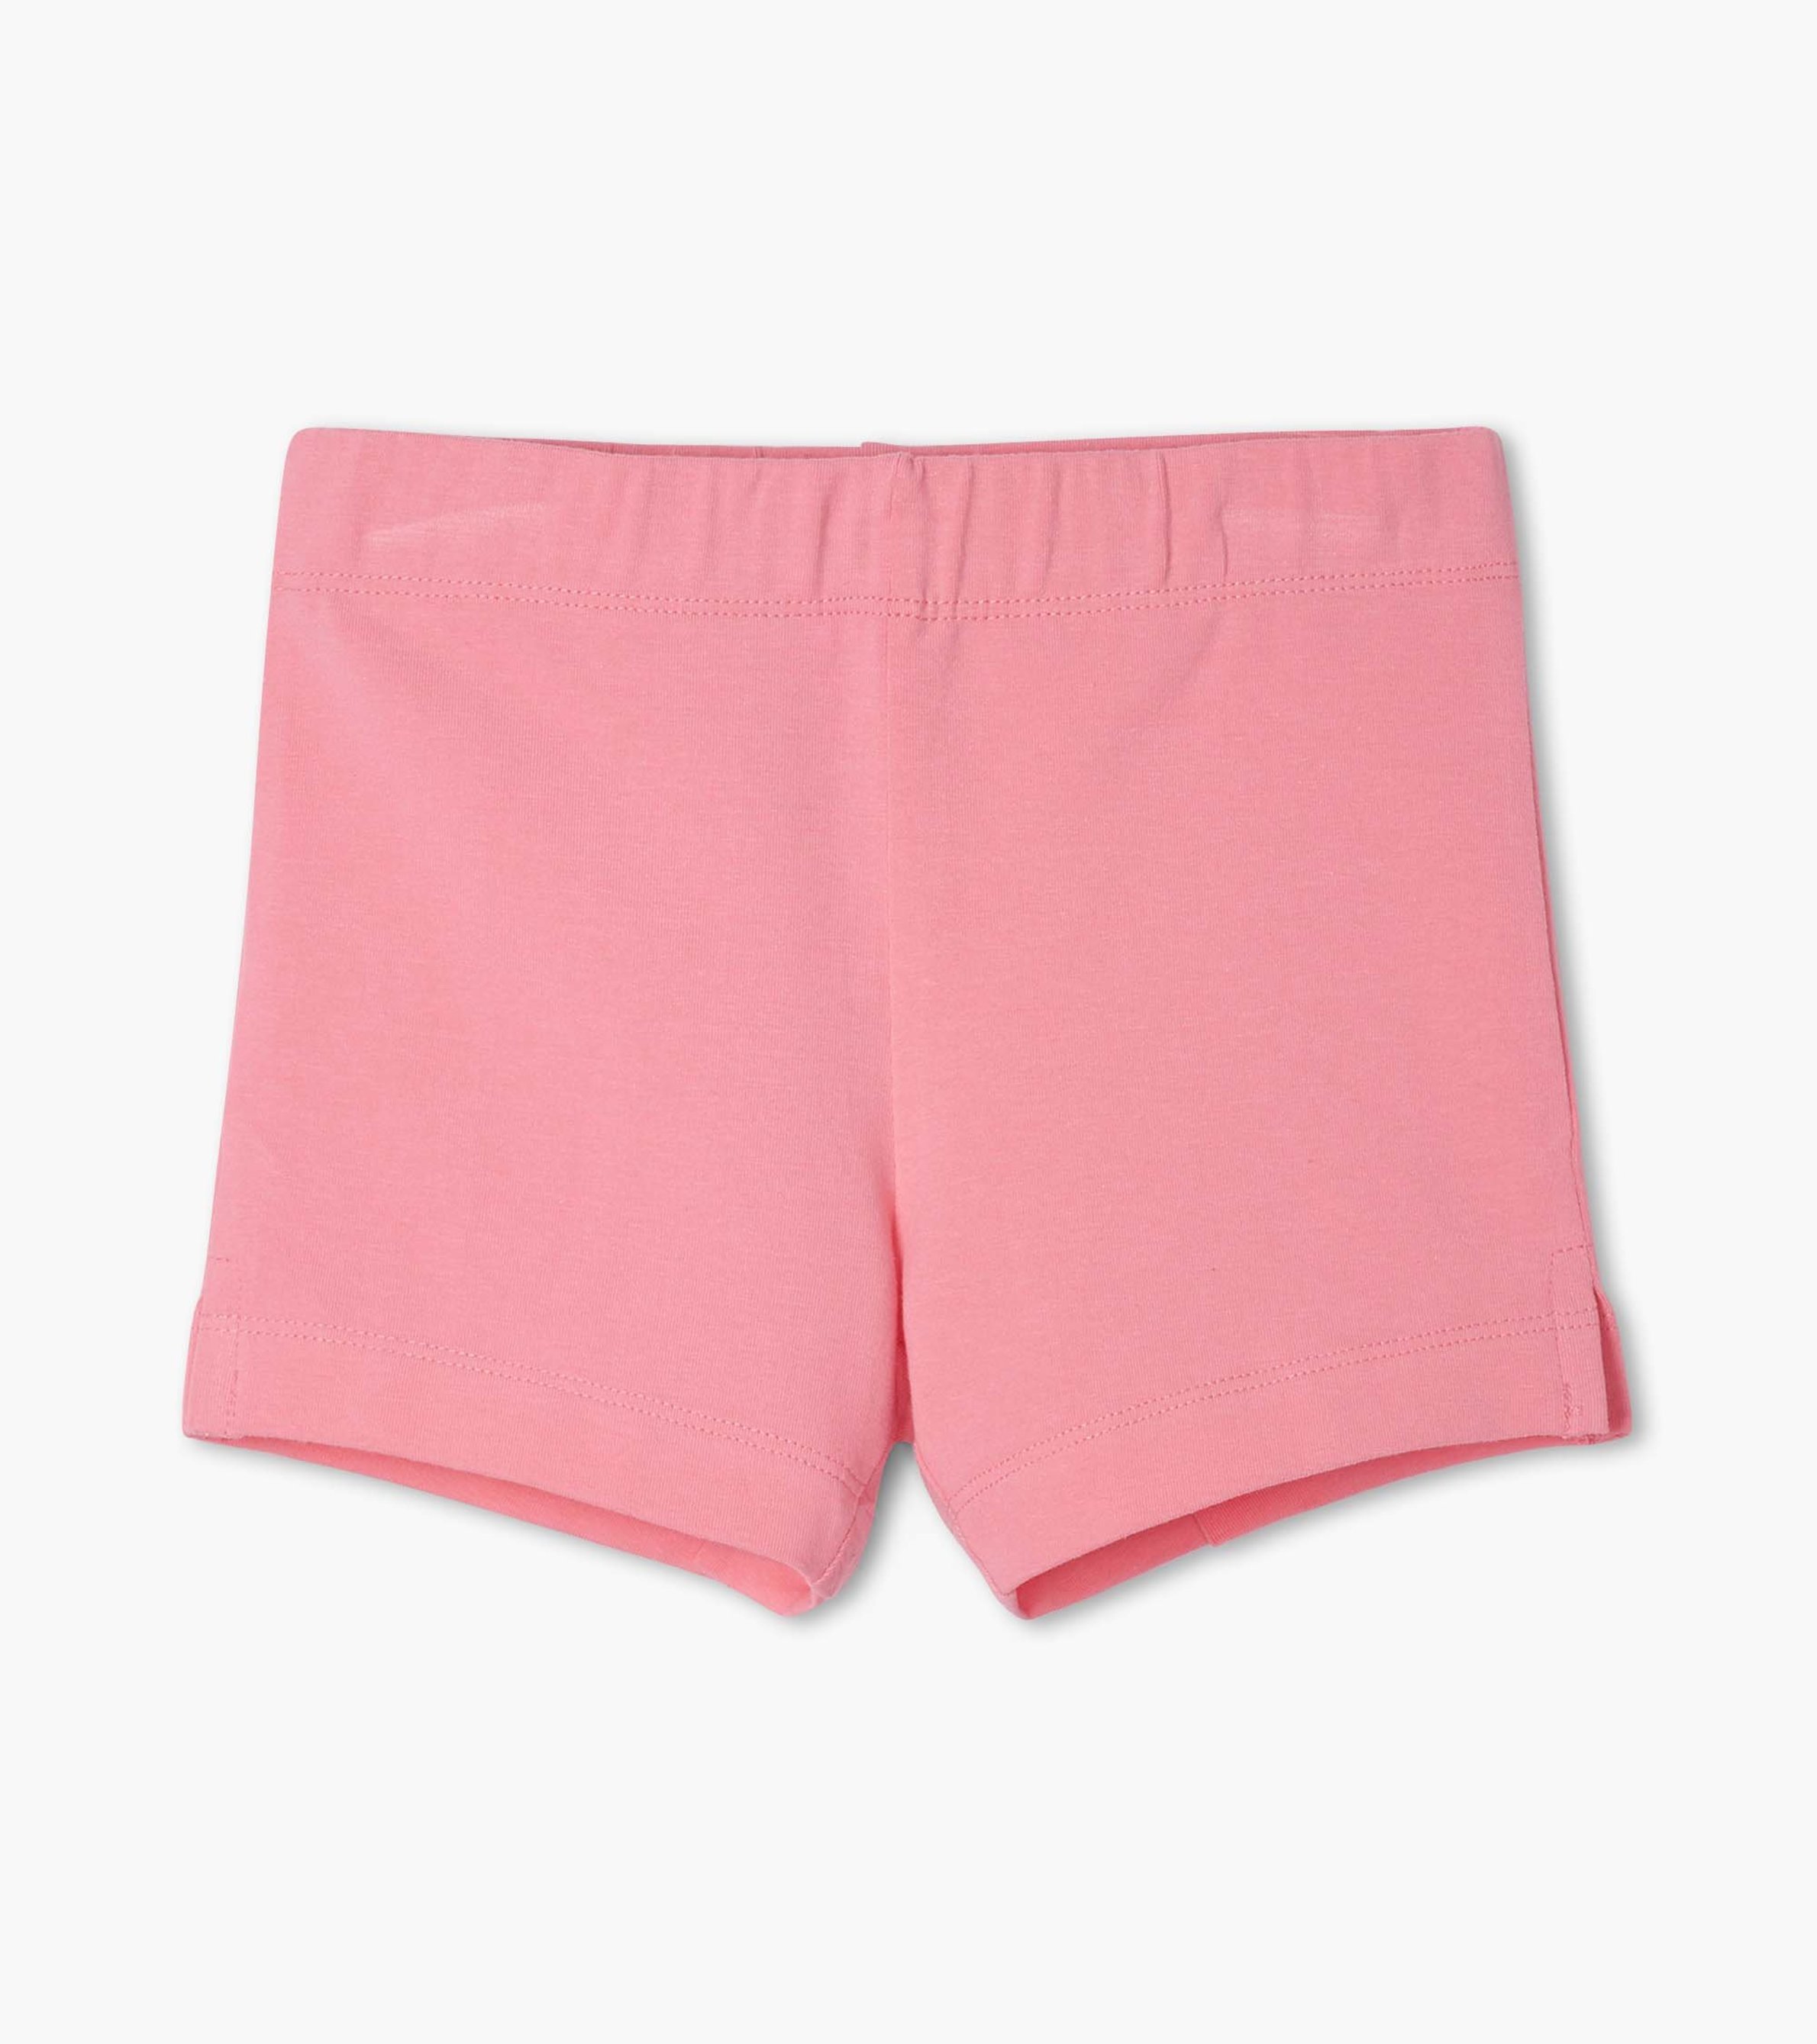 pekkle, Bottoms, Free With Purchase Girls Pink Bike Short Size 8